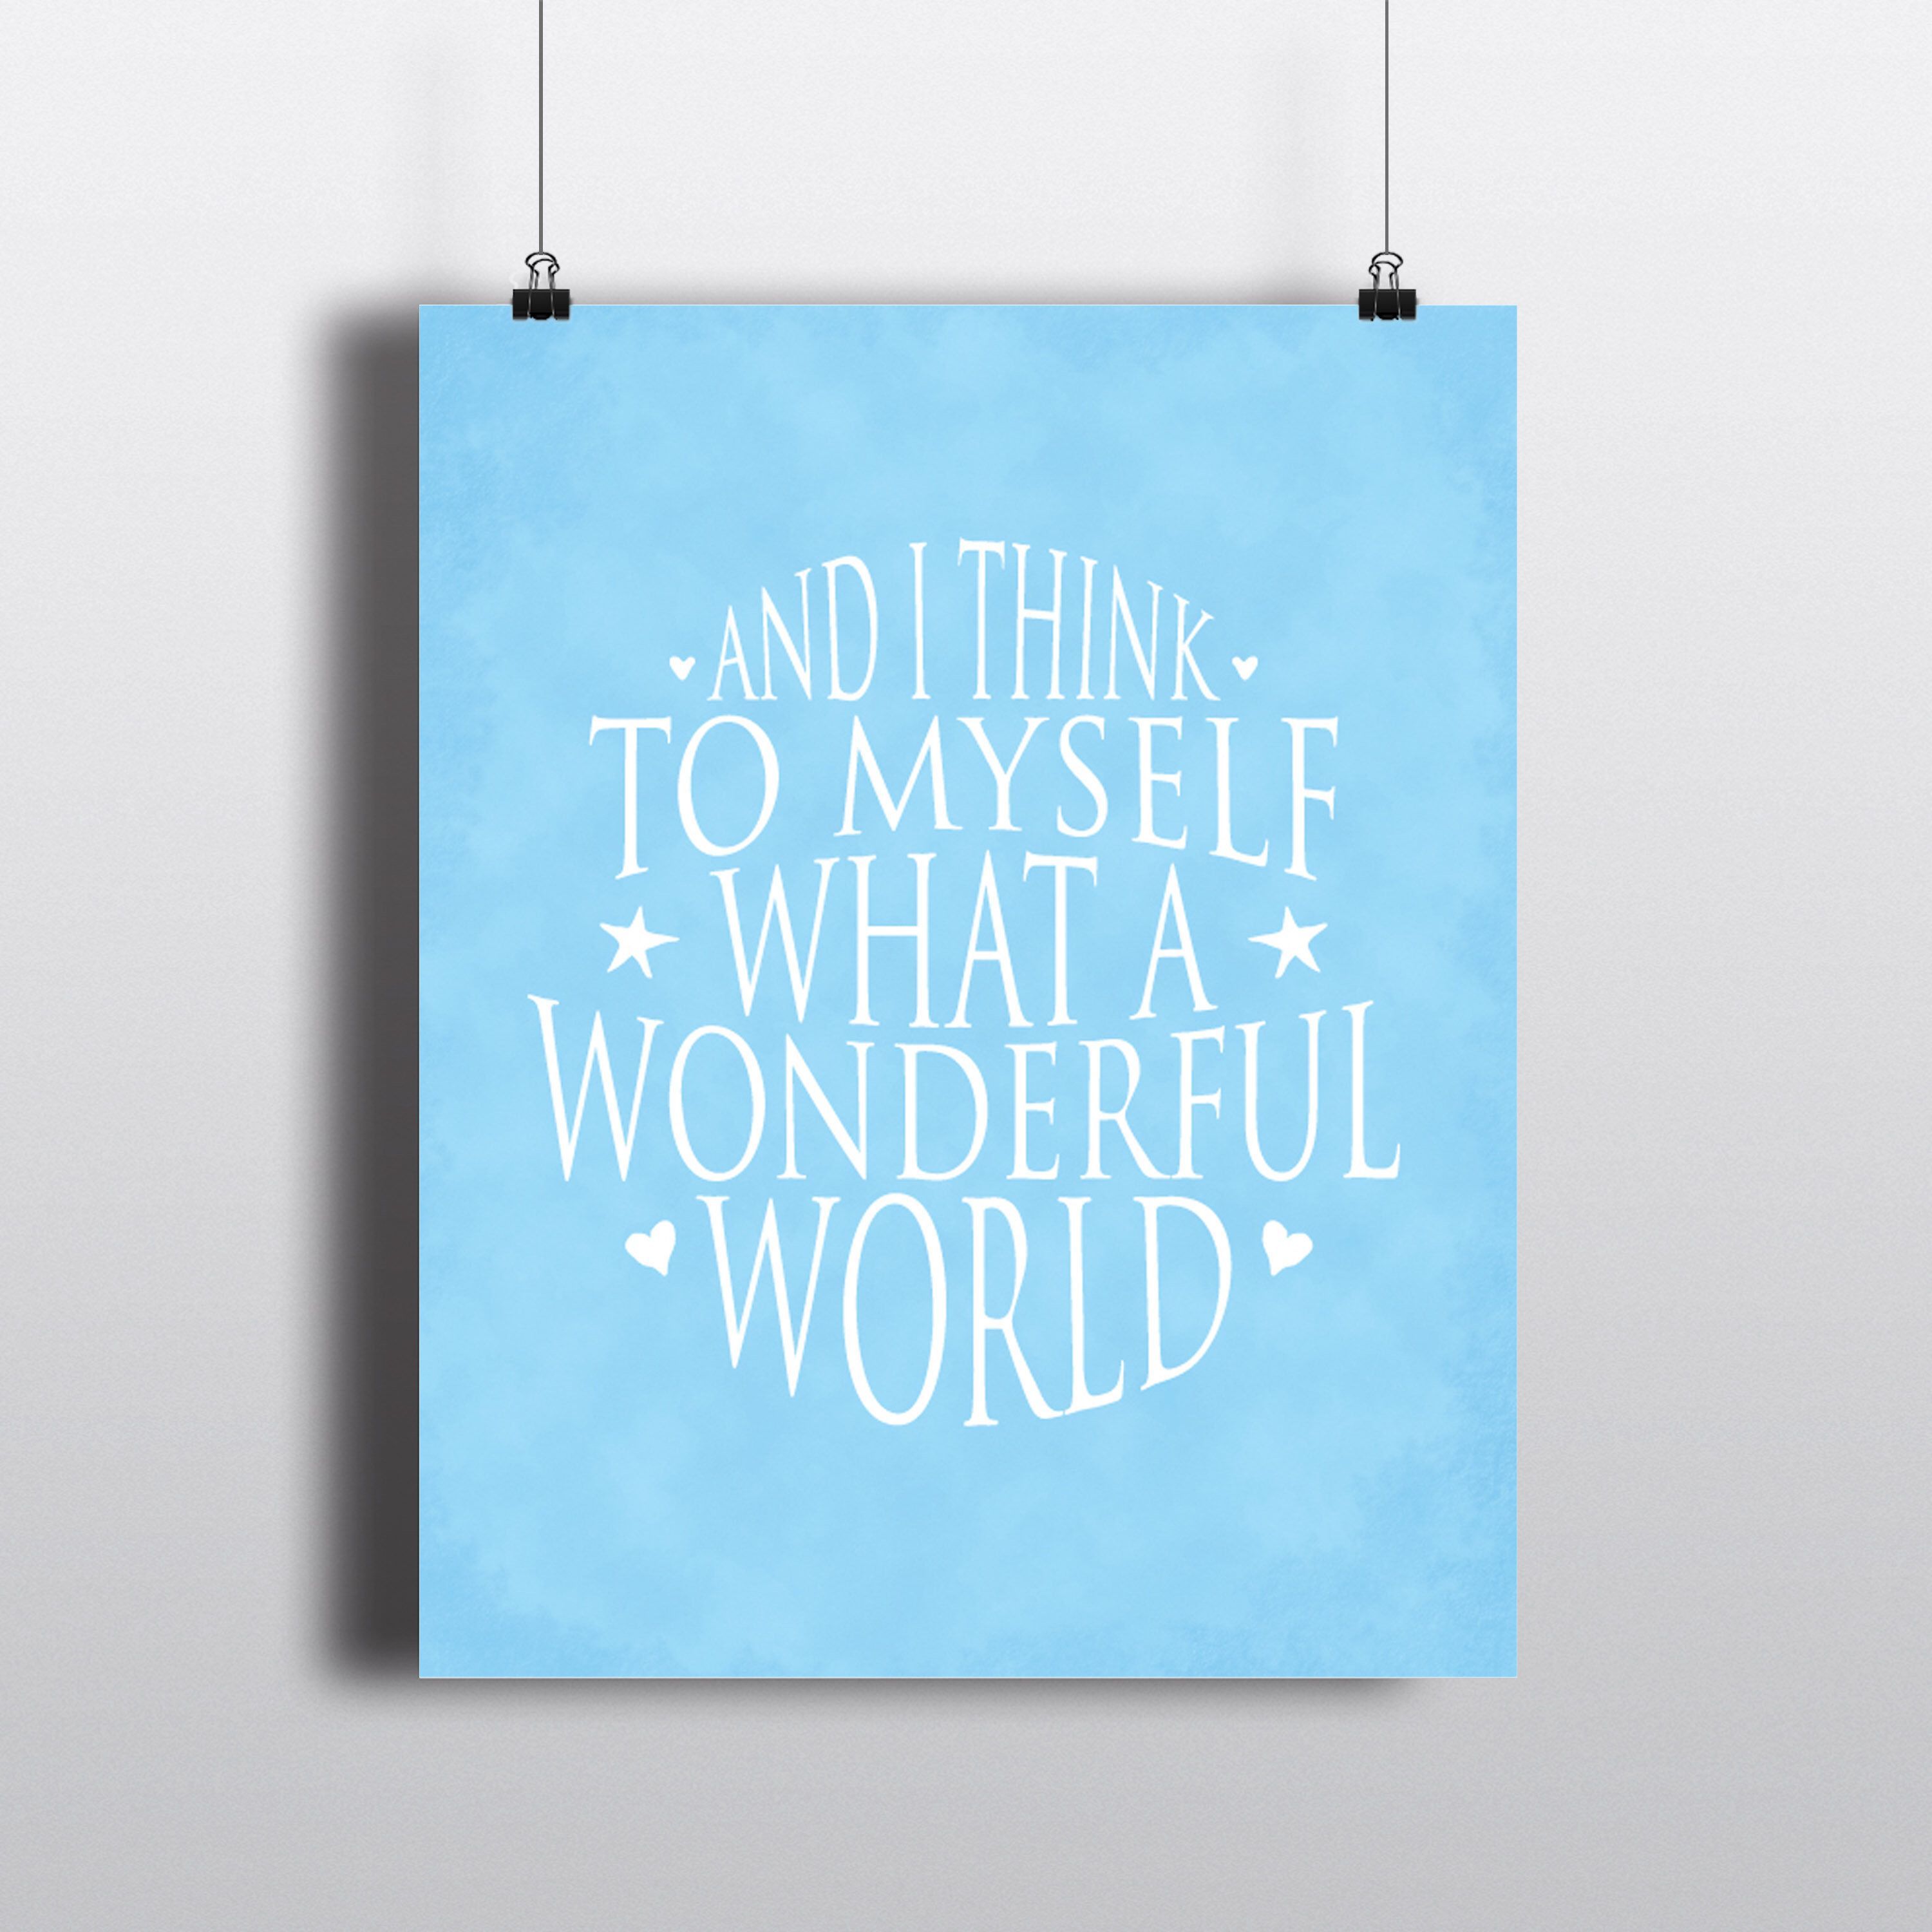 Inspirational Nursery Wall Decor – And I Think To Myself With Regard To Wonderful World Wall Decor (View 26 of 30)